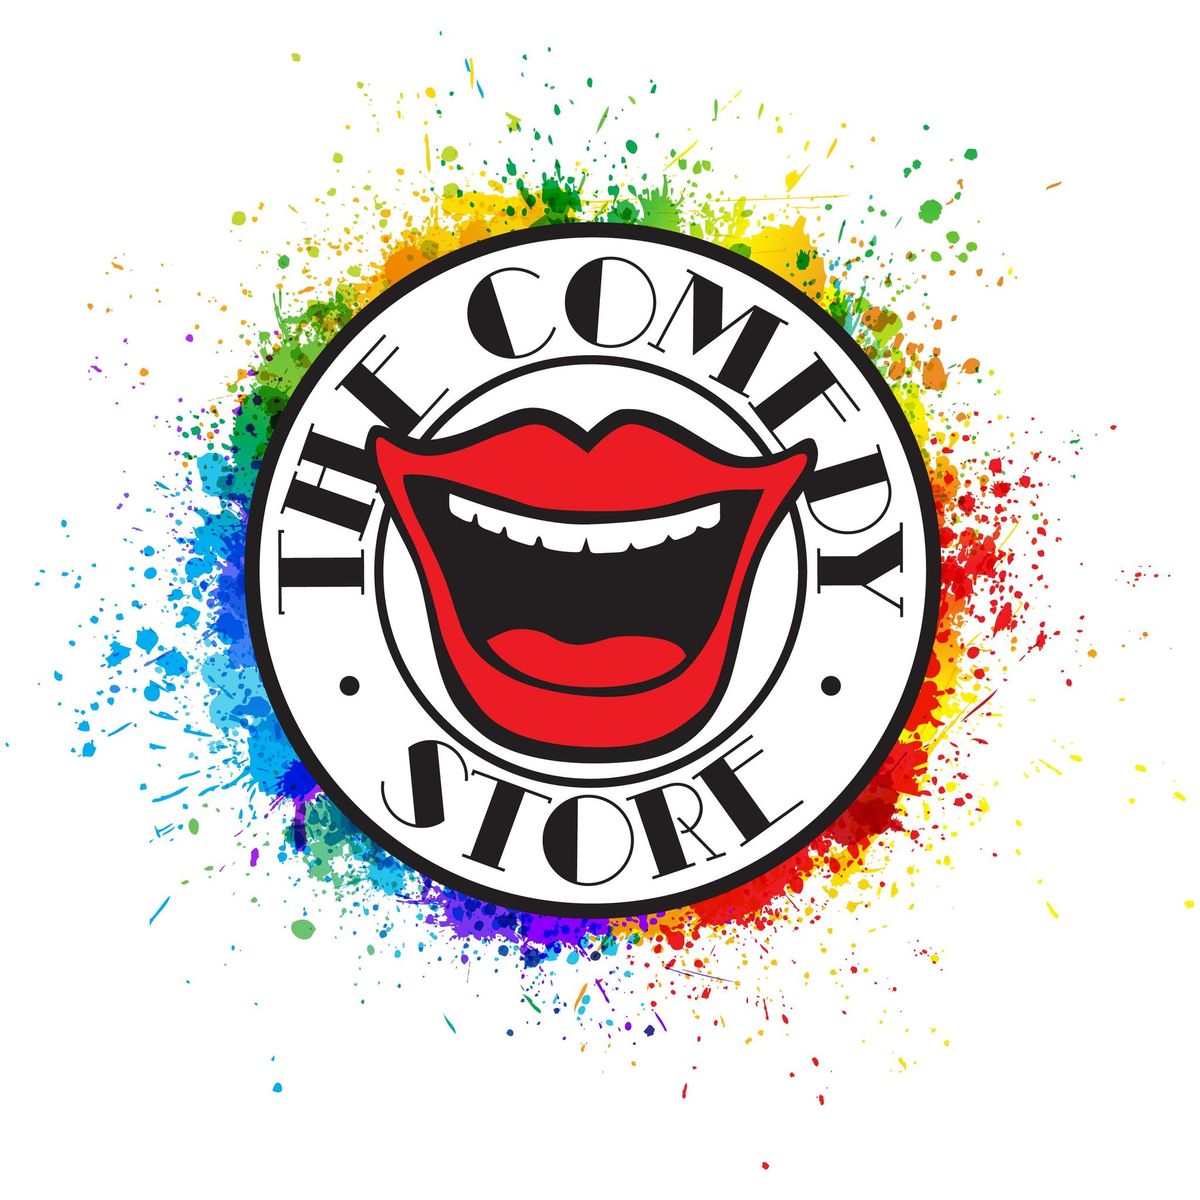 The Comedy Store - Leeds